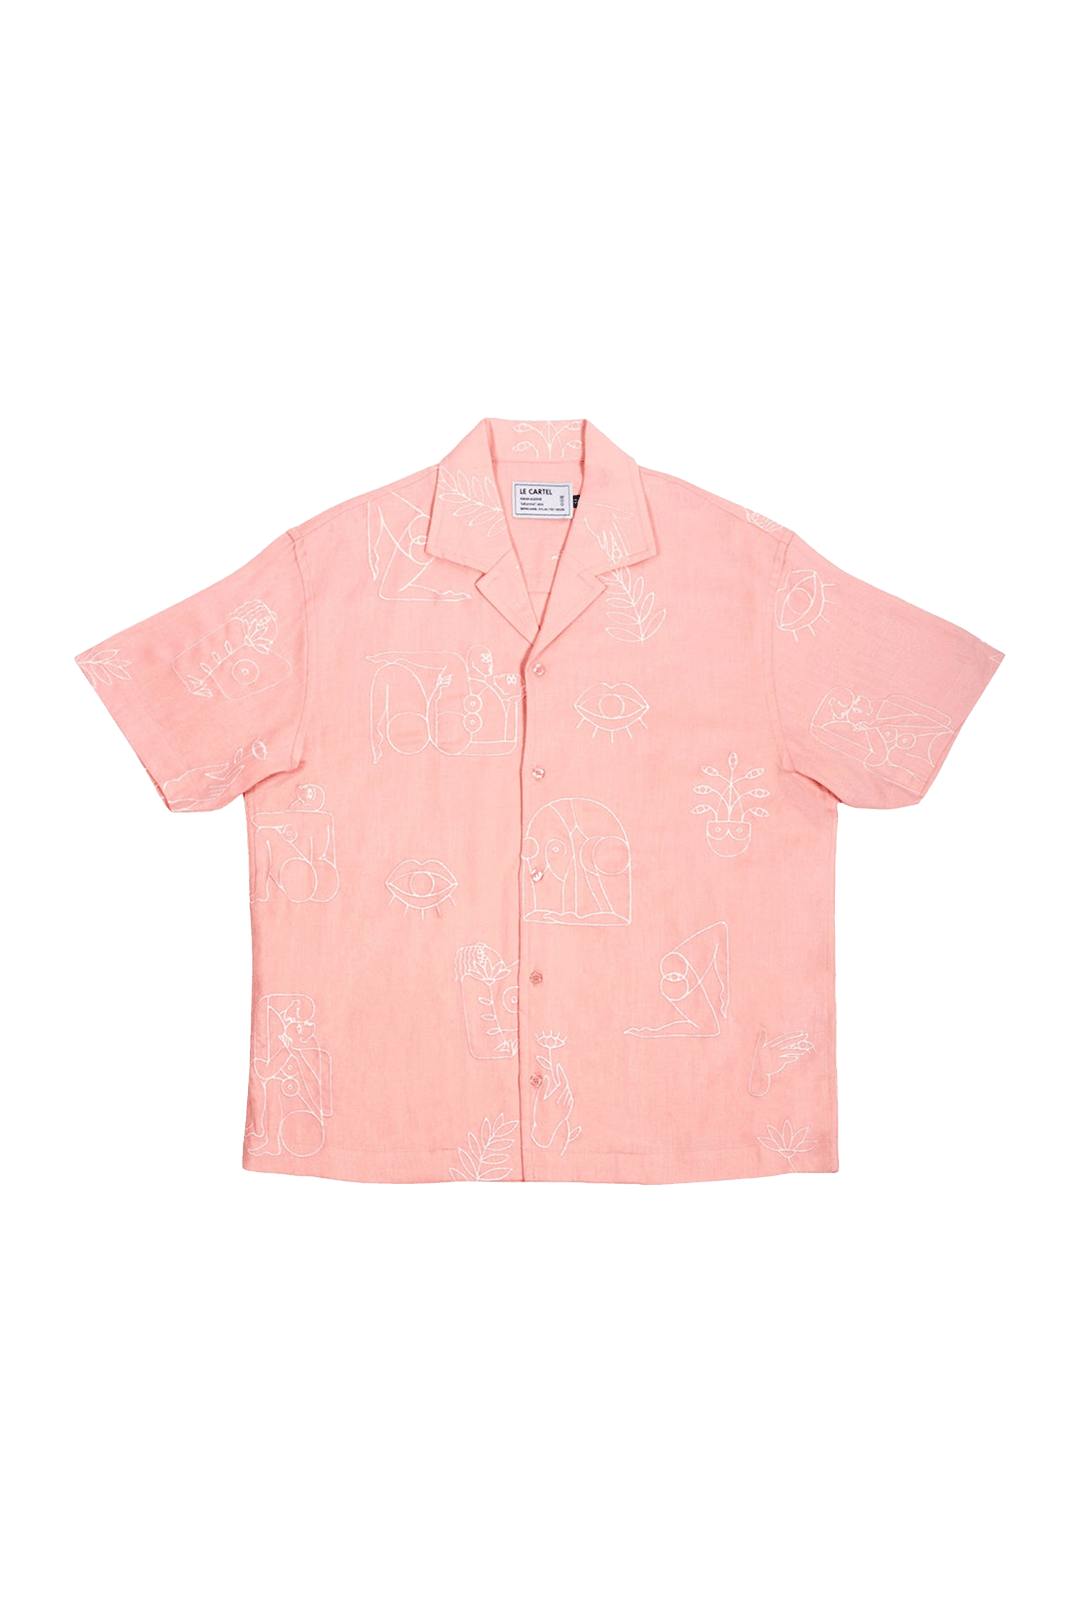 CABRIOLES・Embroidered shirt・Pink